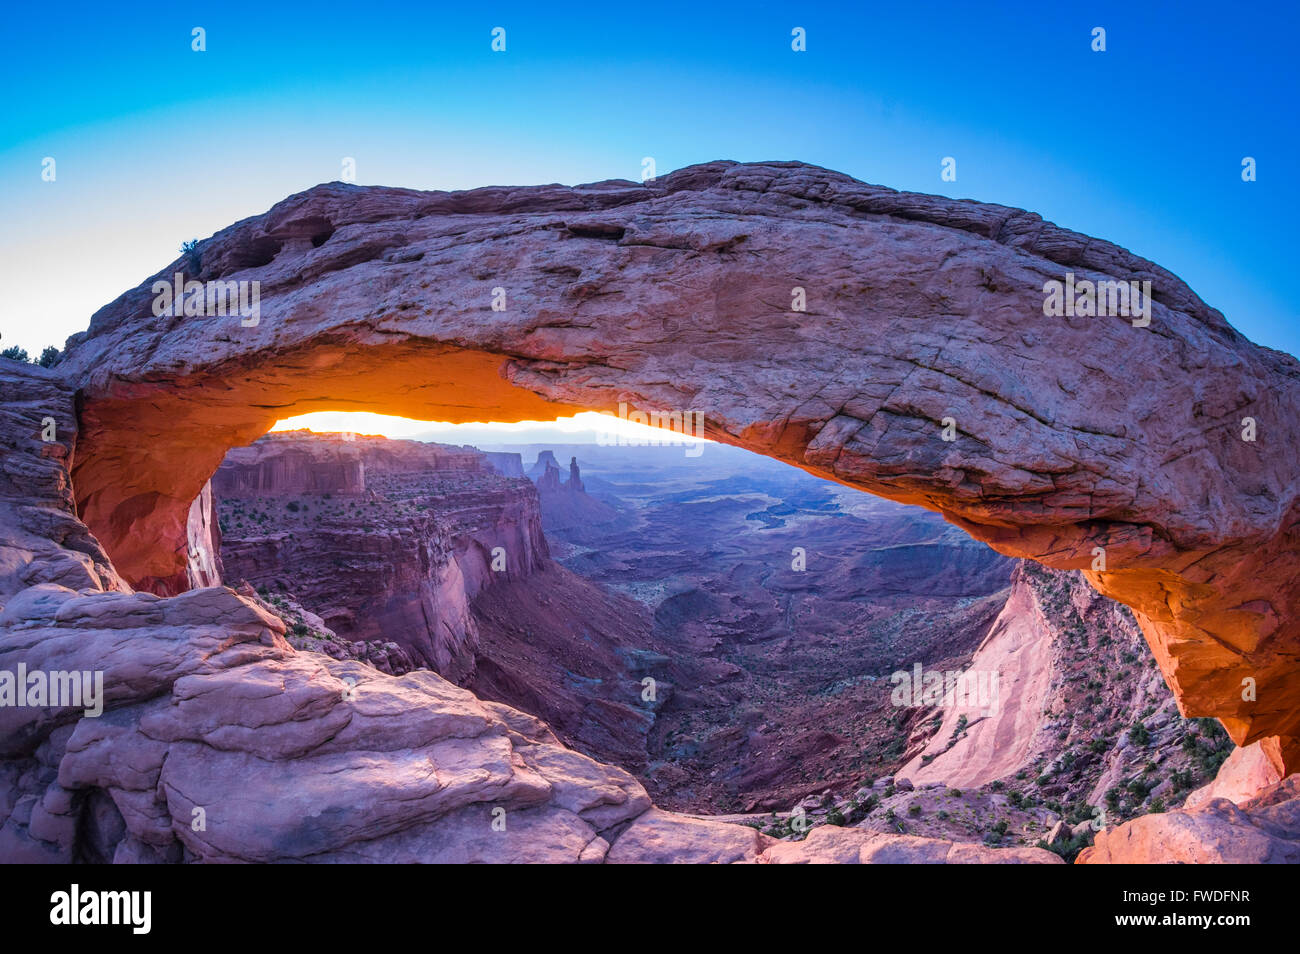 A new day is met with the sun's firey predawn glow casting its warmth on the under side of Mesa Arch, Canyonlands Utah. Stock Photo